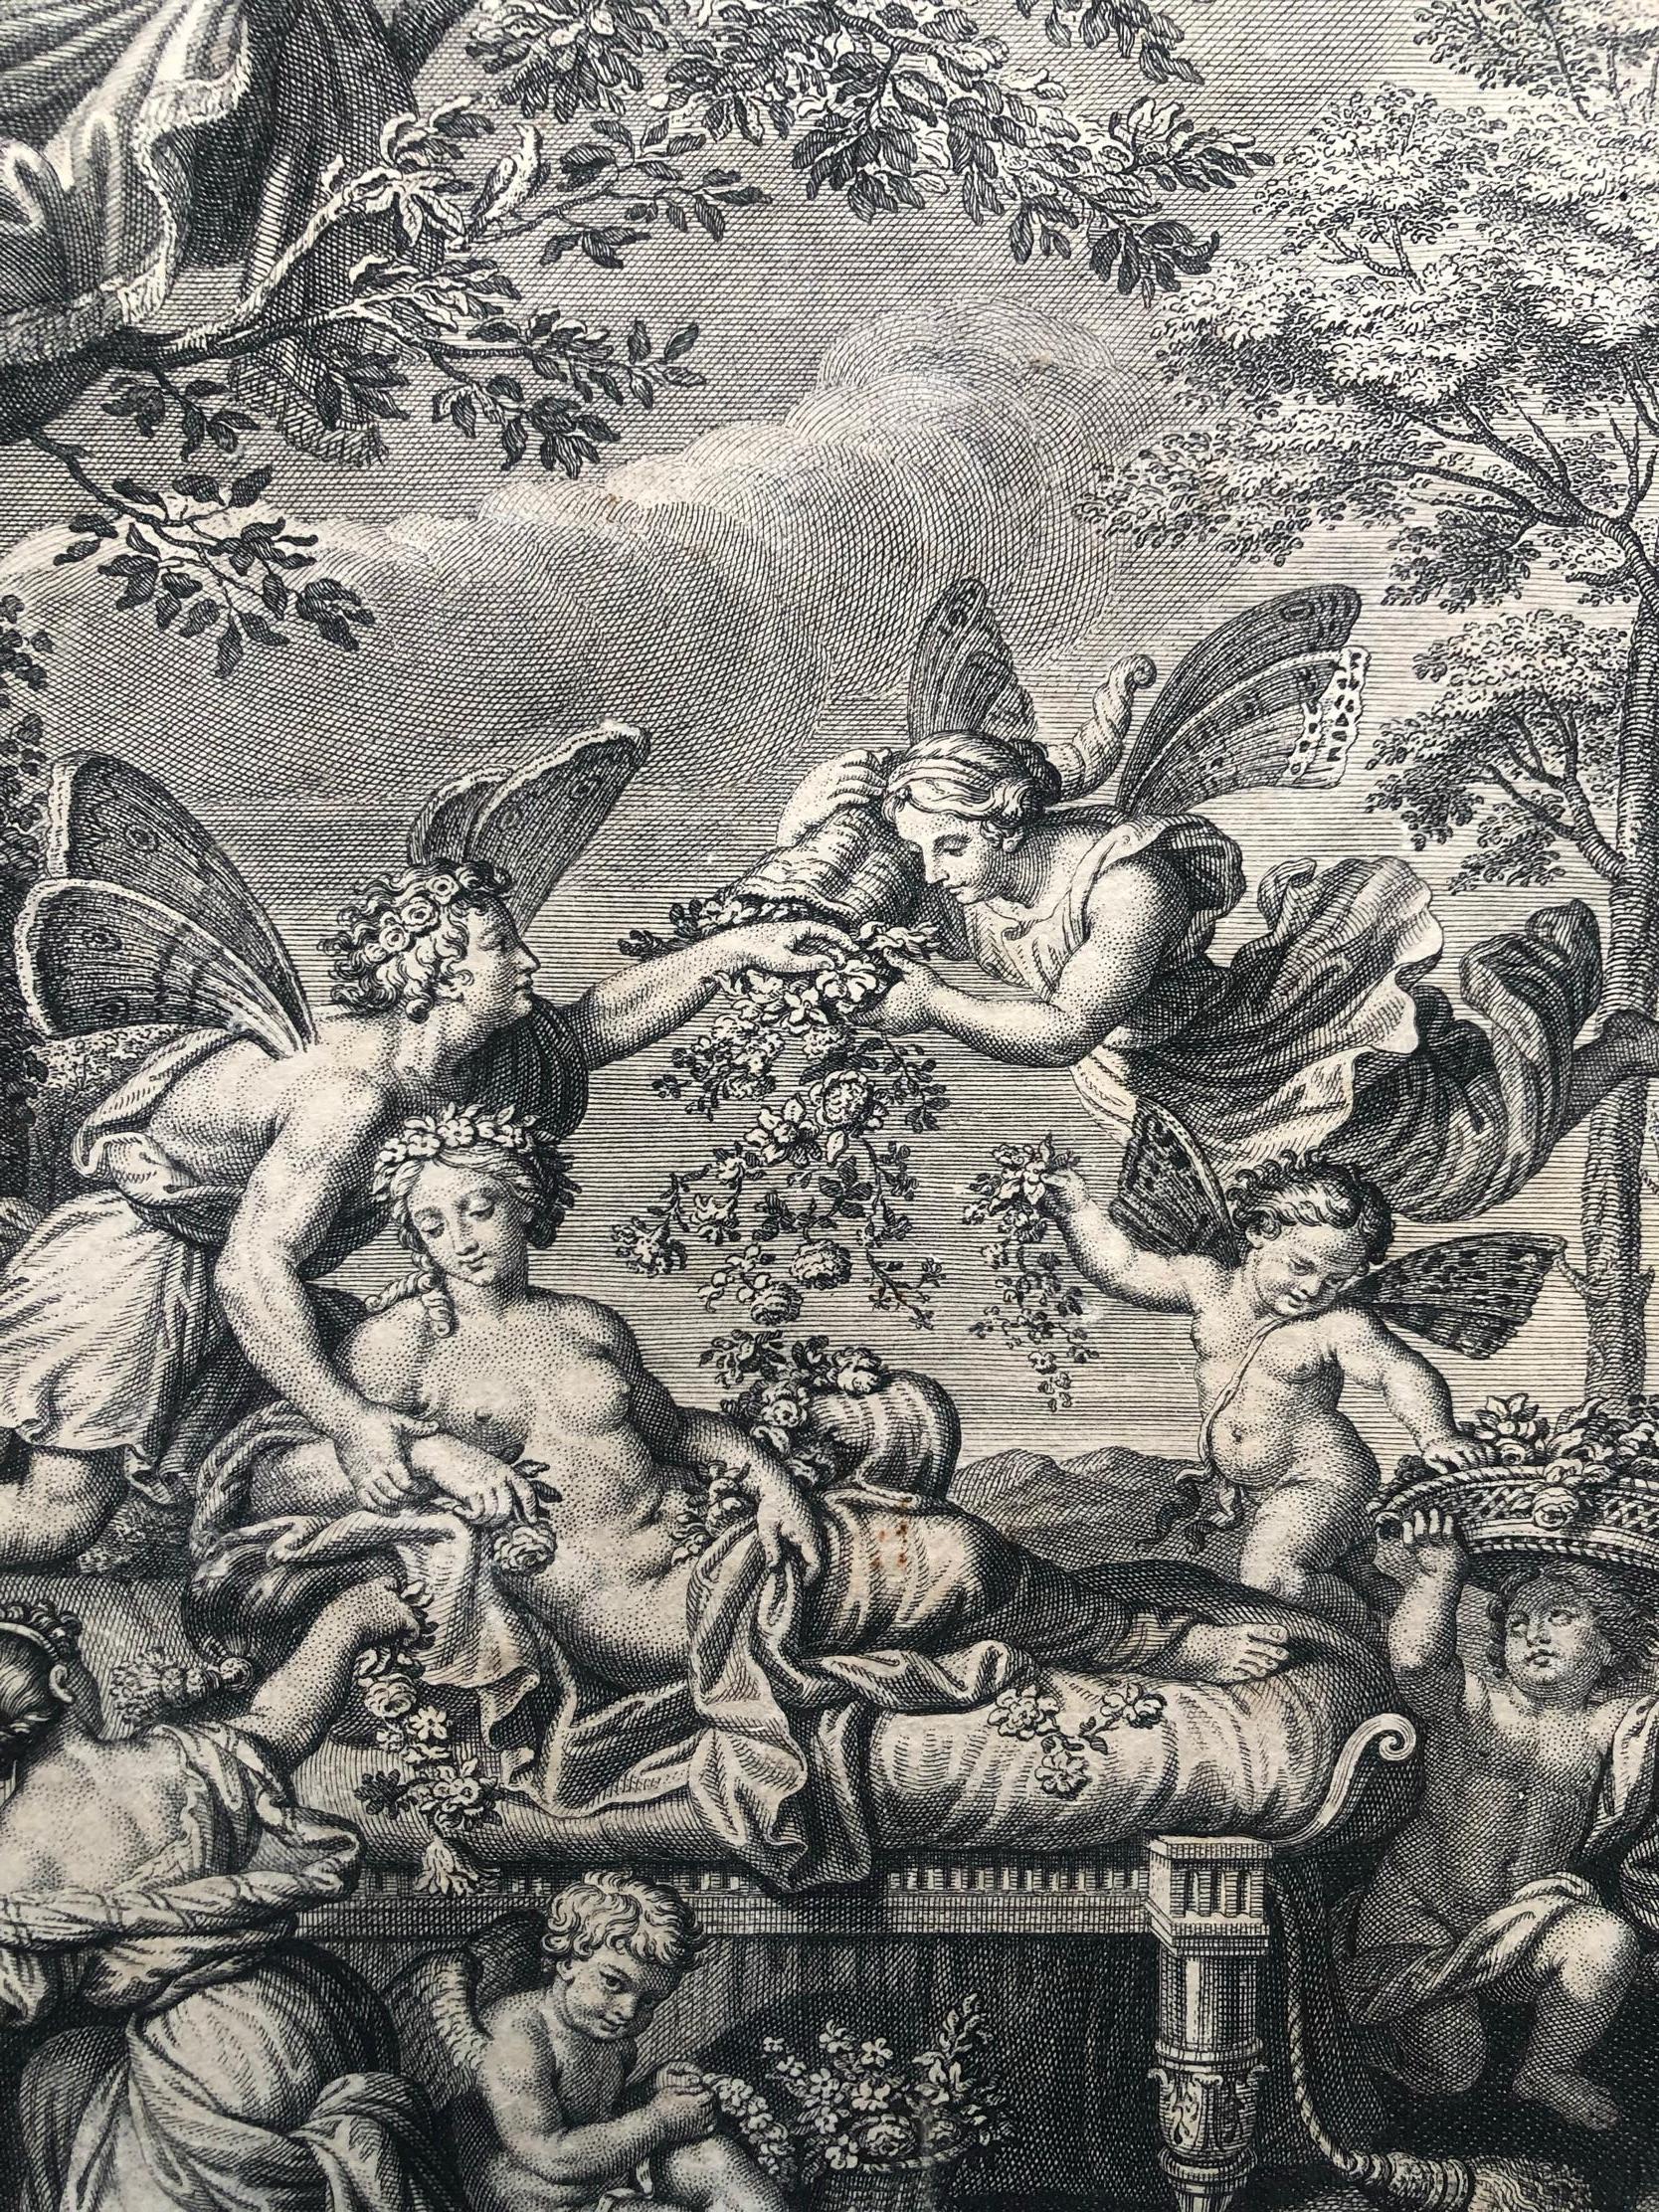 Pair of magnificent engraving by Jean Baptiste de Poilly after the royal works of Pierre Mignard for the Duke of Orleans in 1677. These allegorical representations of the seasons could be seen in the Gallery of Apollo at the Château de Saint Cloud